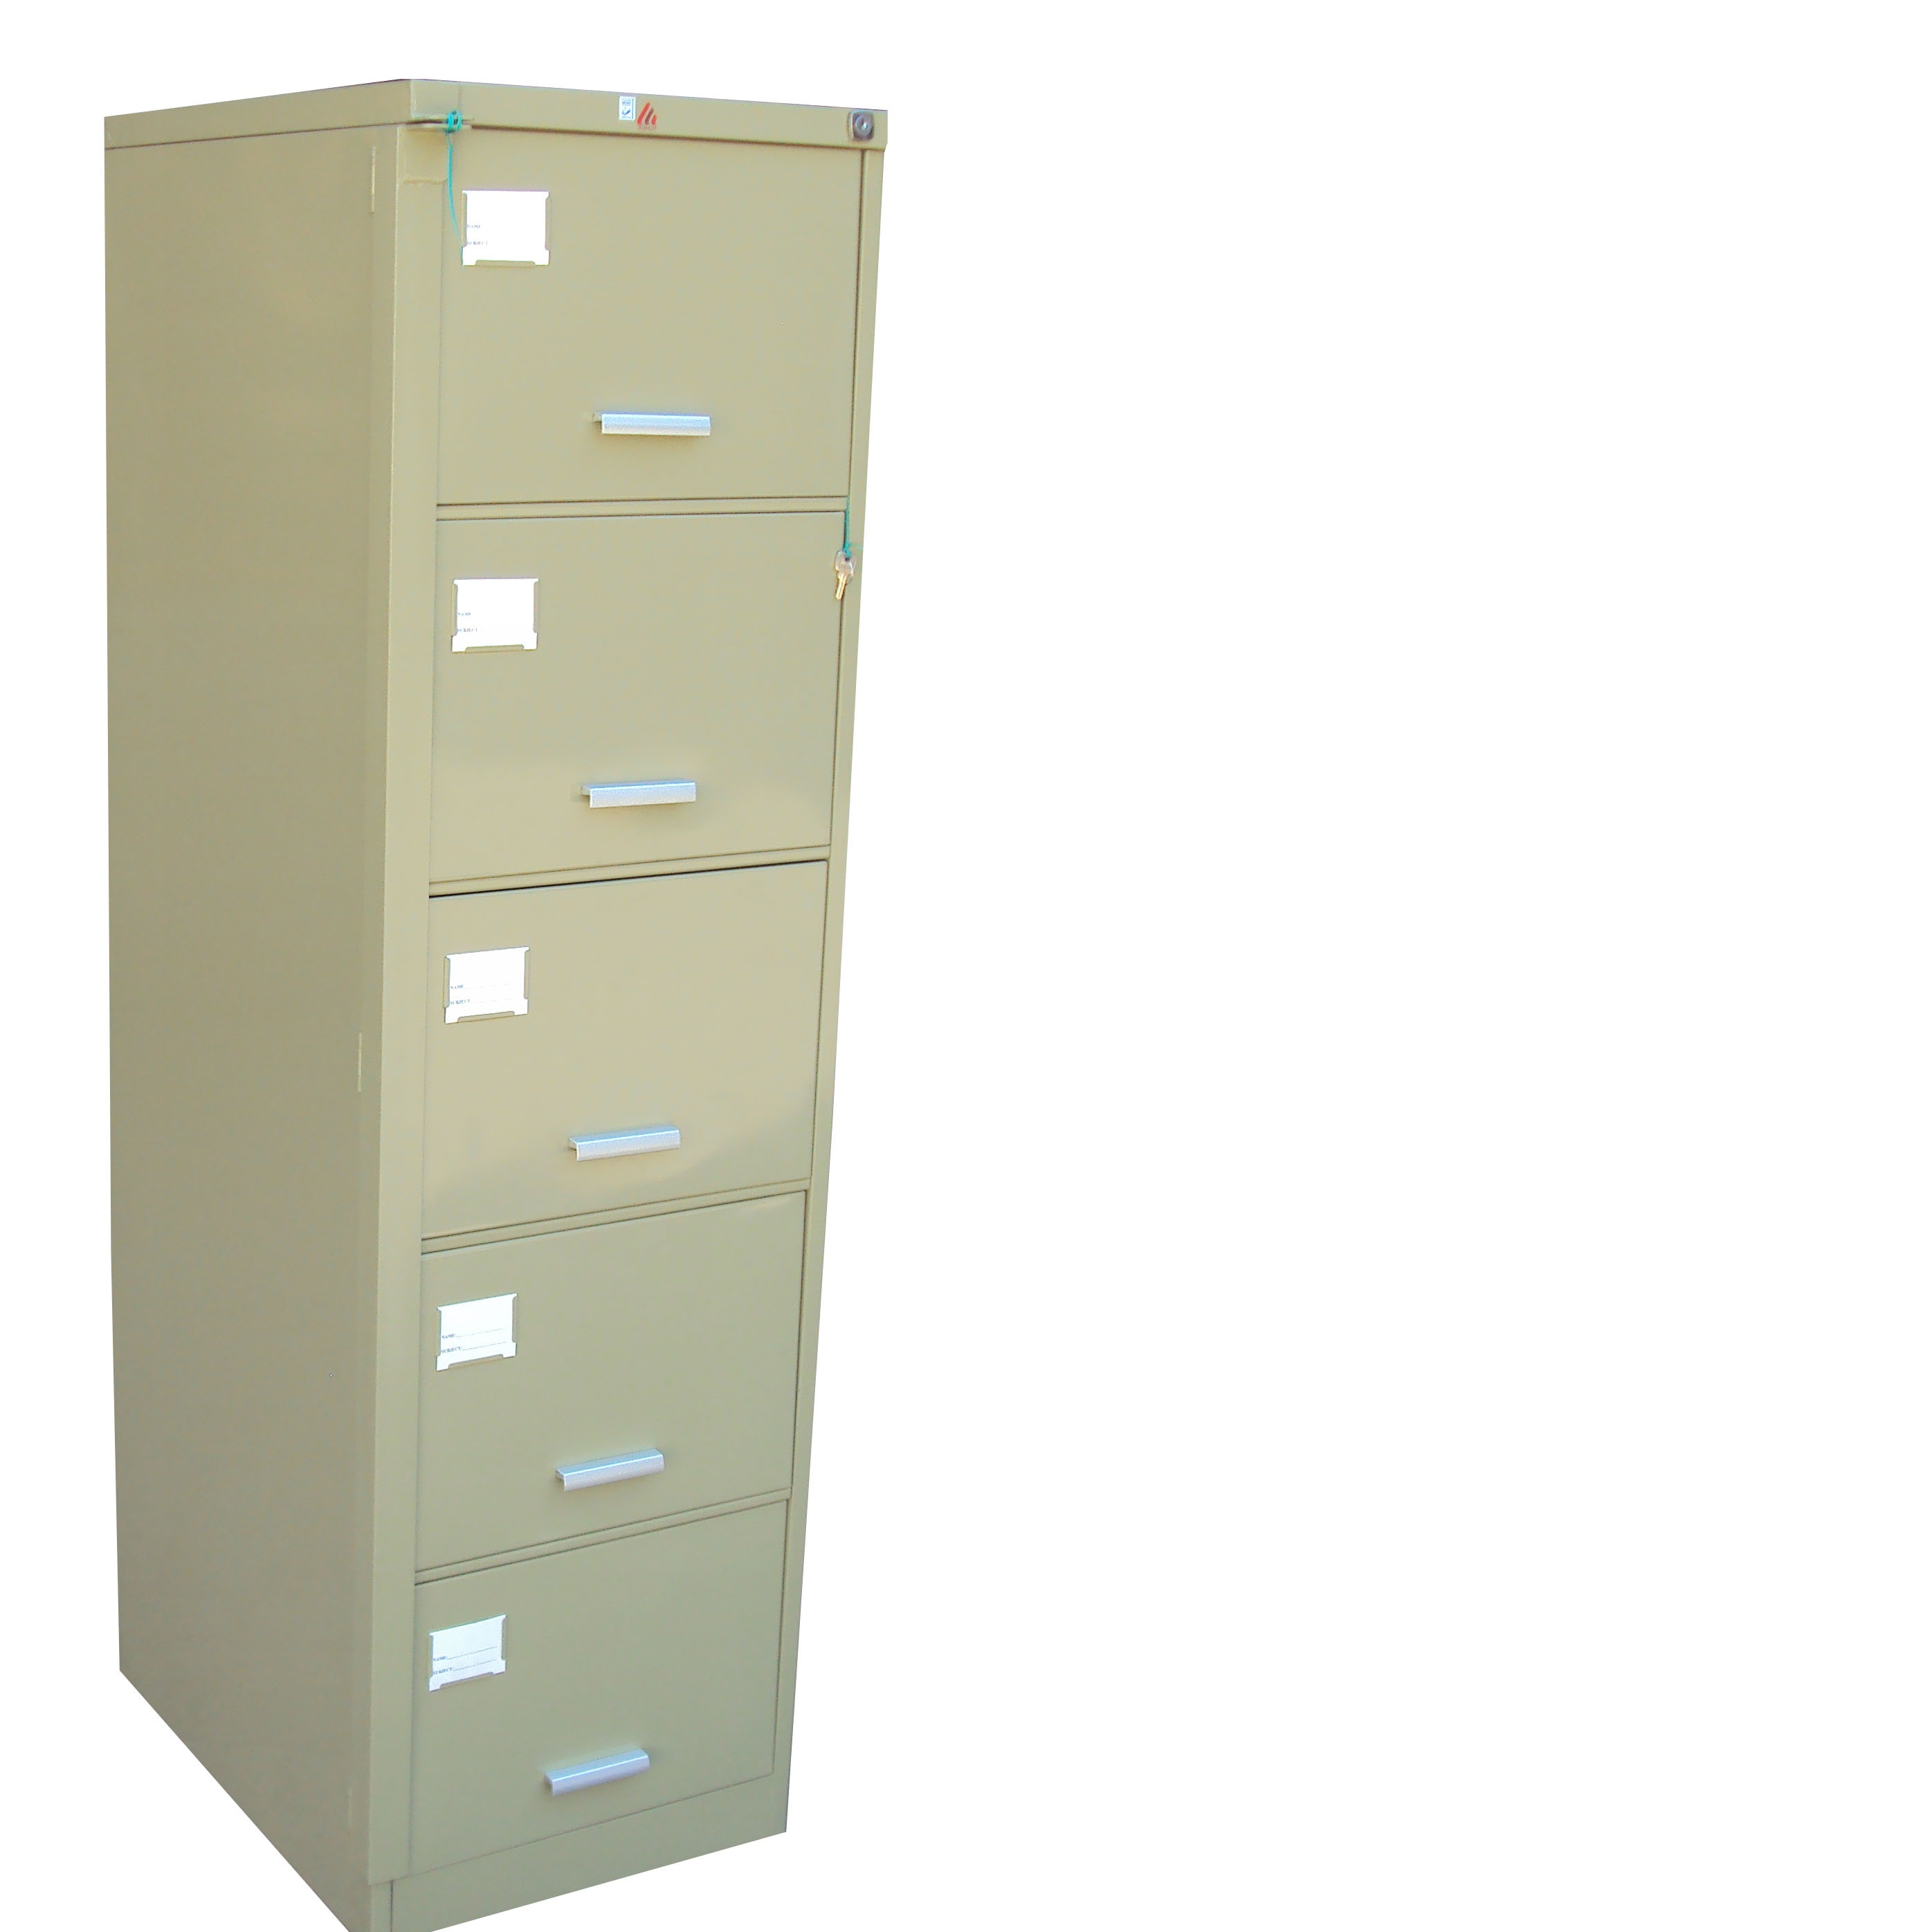 5 Drawer Filing Cabinet Ashut Engineers Limited intended for size 2792 X 2792